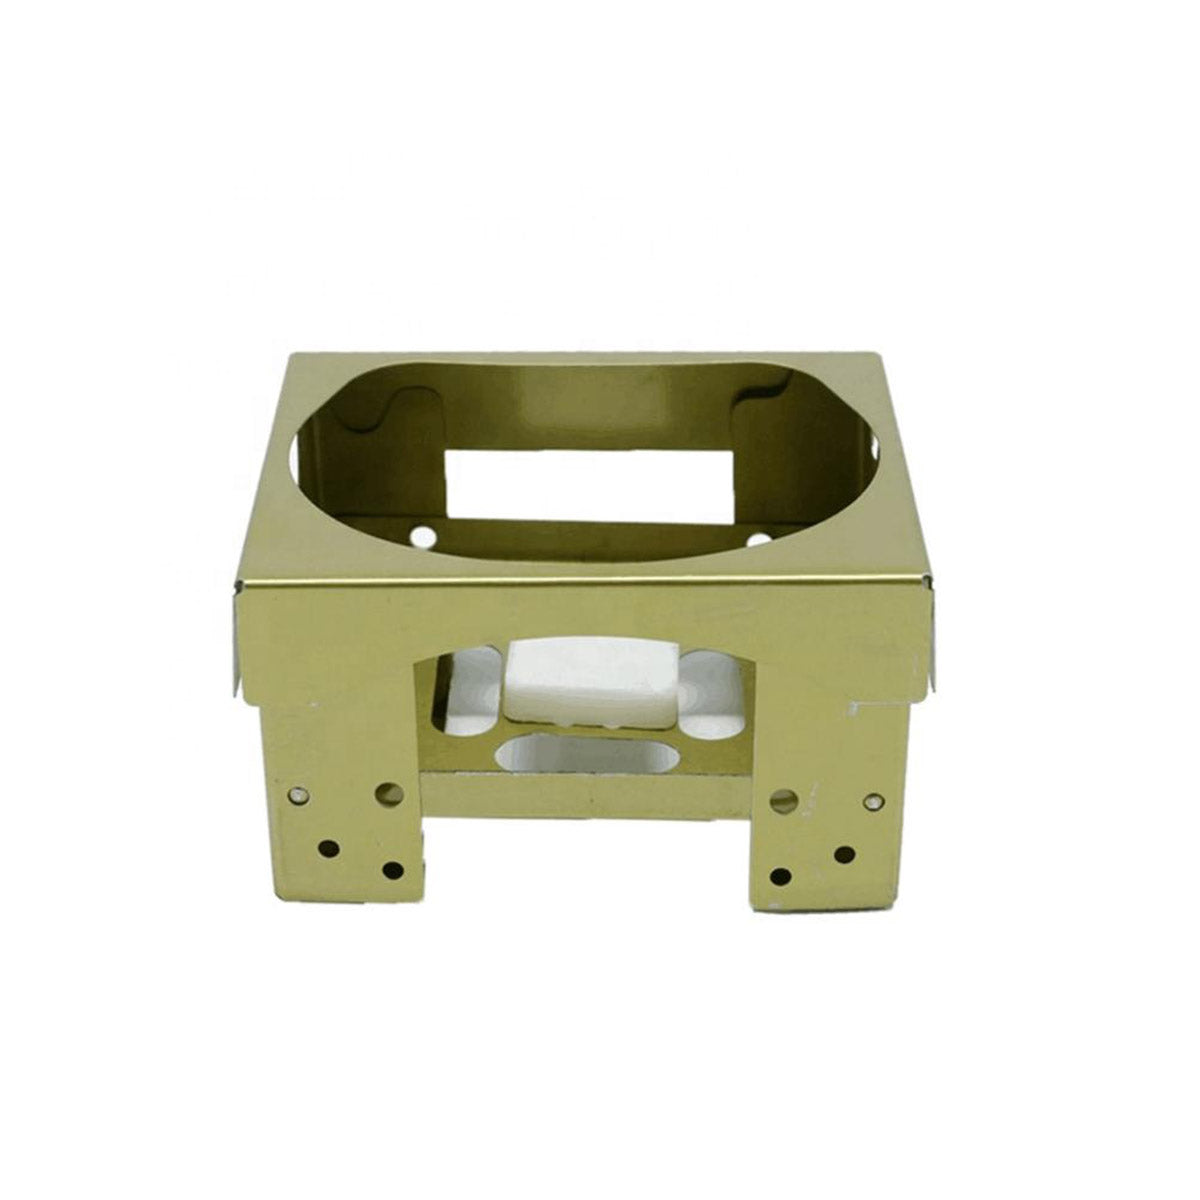 Folding Solid Fuel Emergency Stove - Hexamine Stove